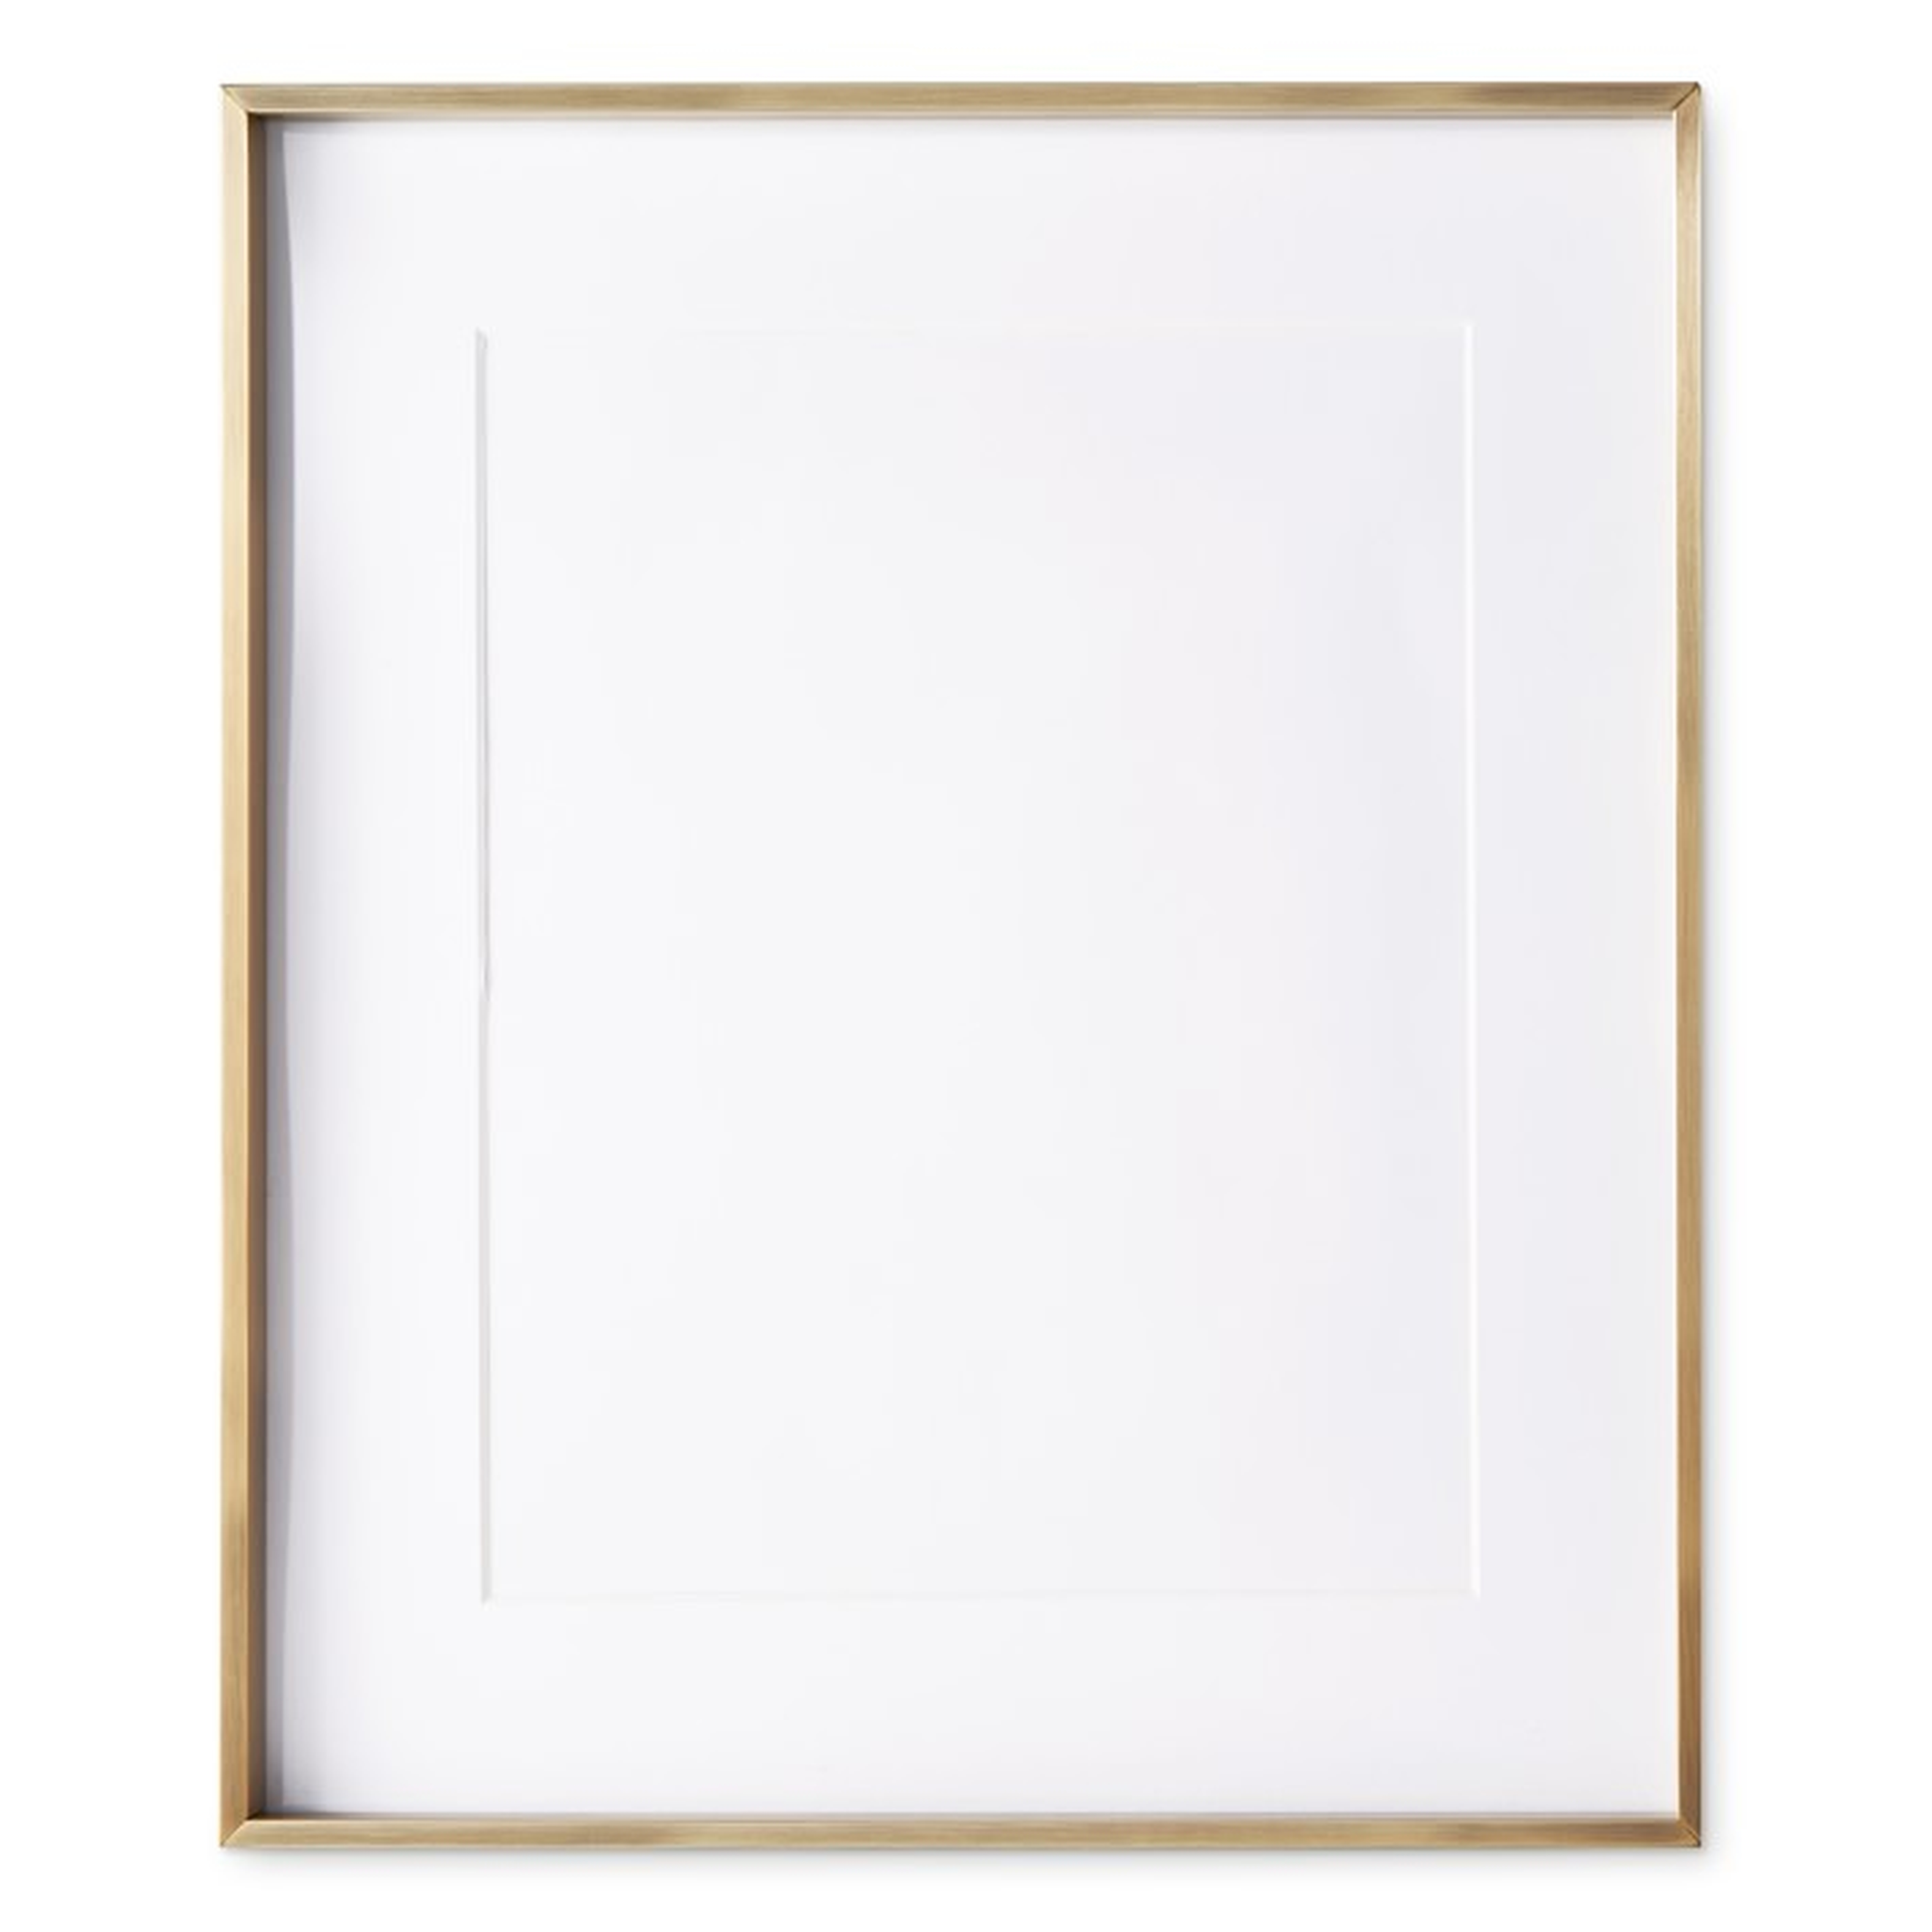 Polished Nickel Gallery Frames with Antique Brass, 11" X 14" - Williams Sonoma